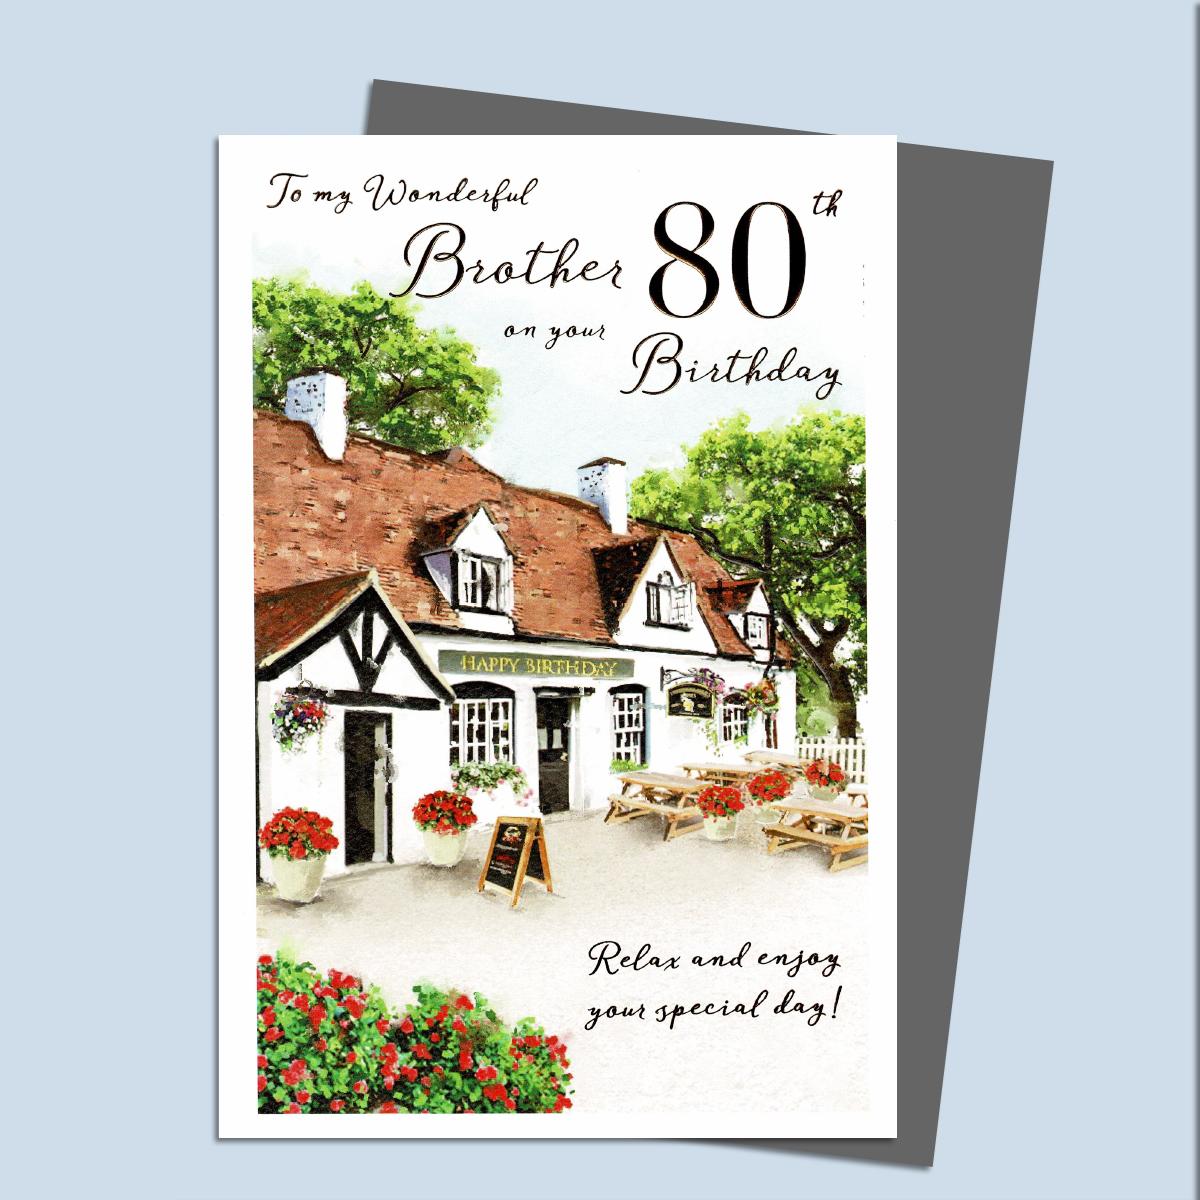 Brother 80th Birthday Card Featuring The Front Of A Public House